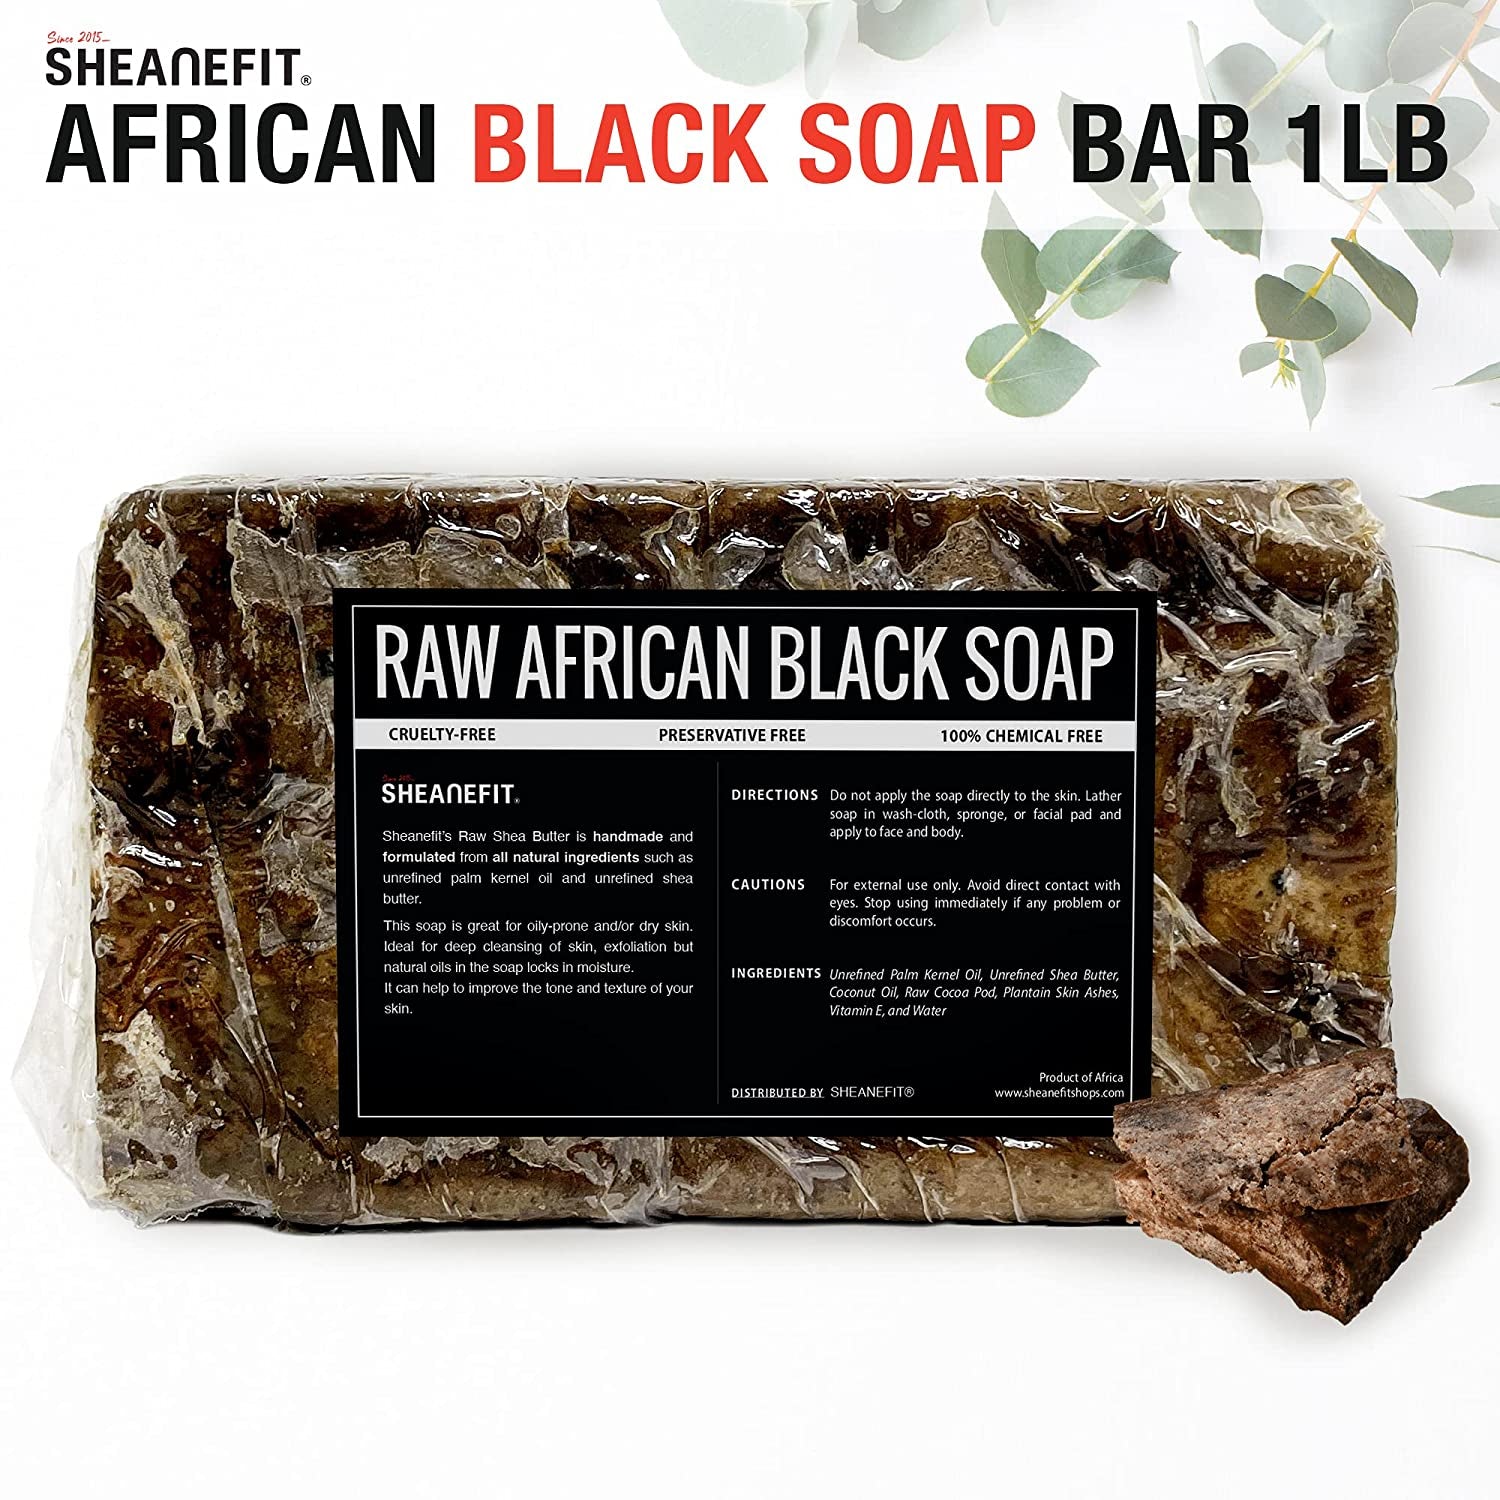 Organic African Black Soap - Skincare and Body Care